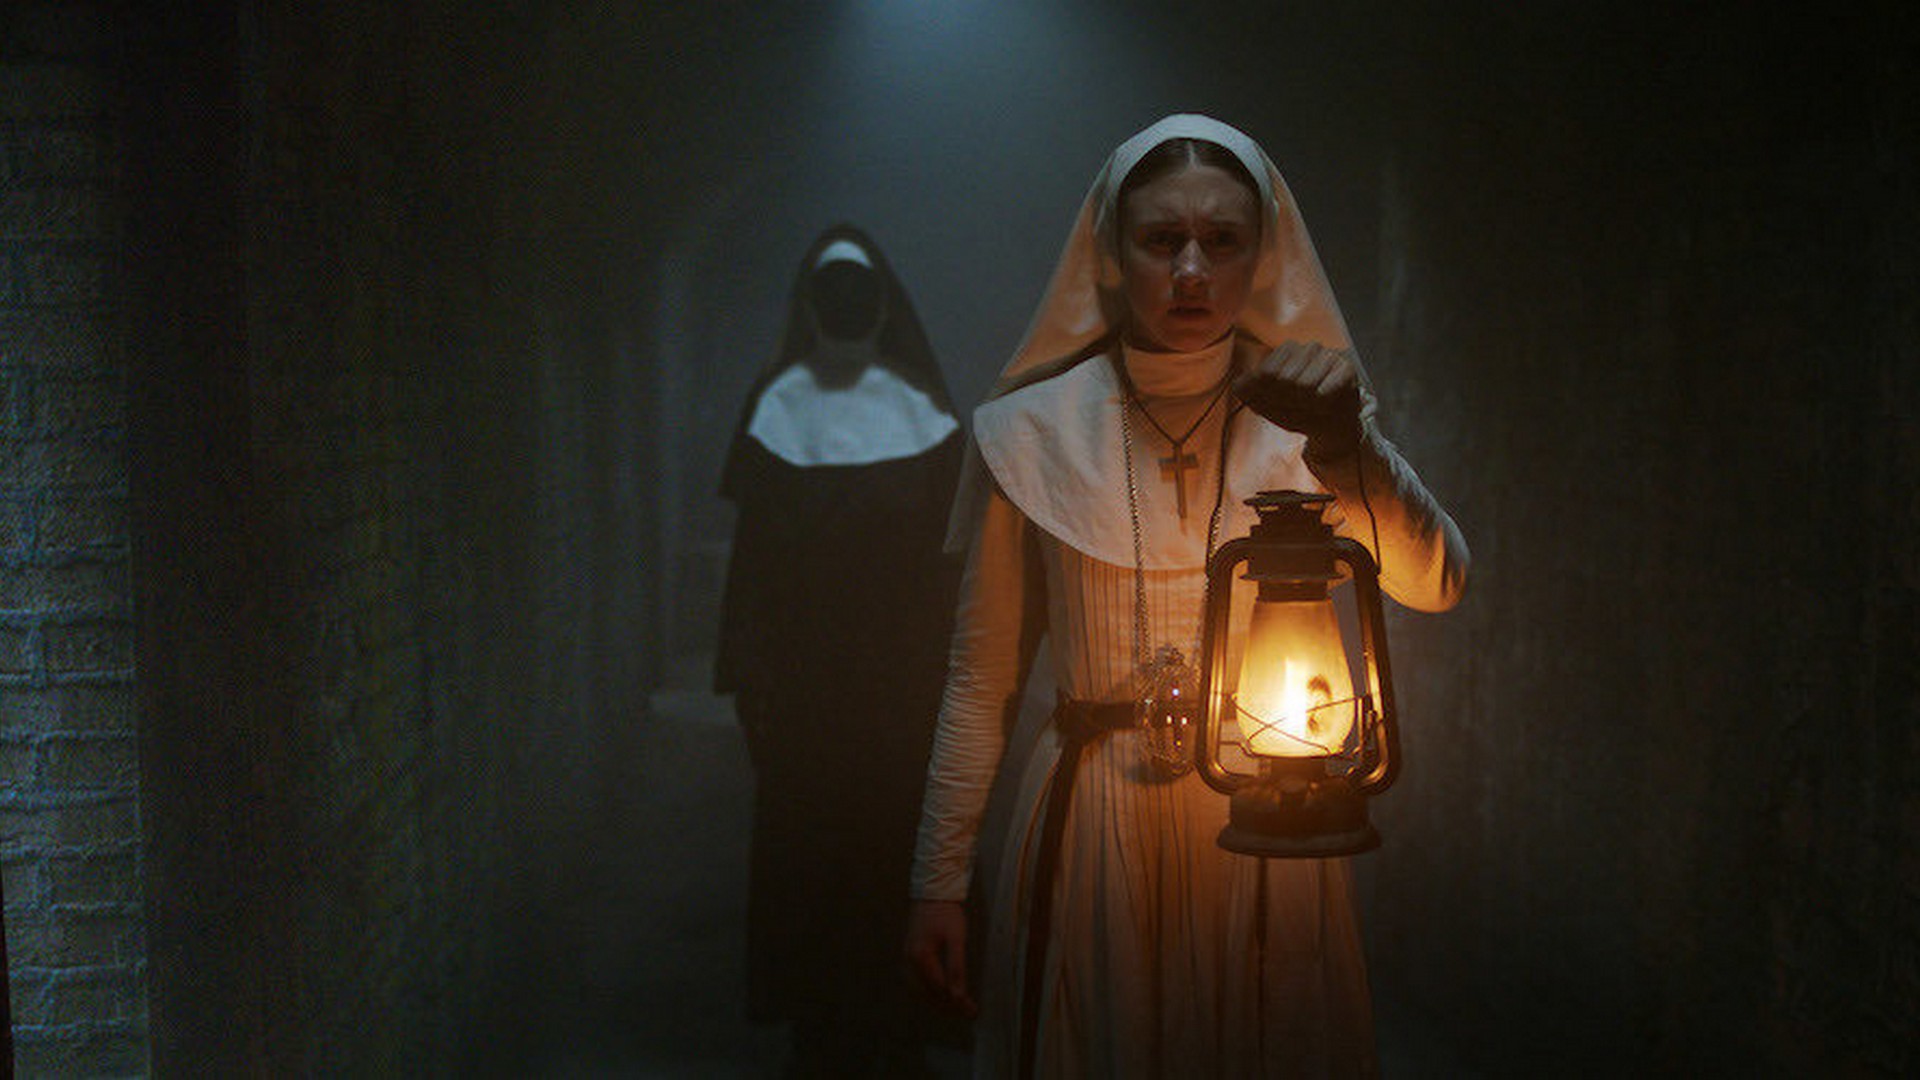 The Nun Movie Desktop Backgrounds with image resolution 1920x1080 pixel. You can make this wallpaper for your Desktop Computer Backgrounds, Mac Wallpapers, Android Lock screen or iPhone Screensavers